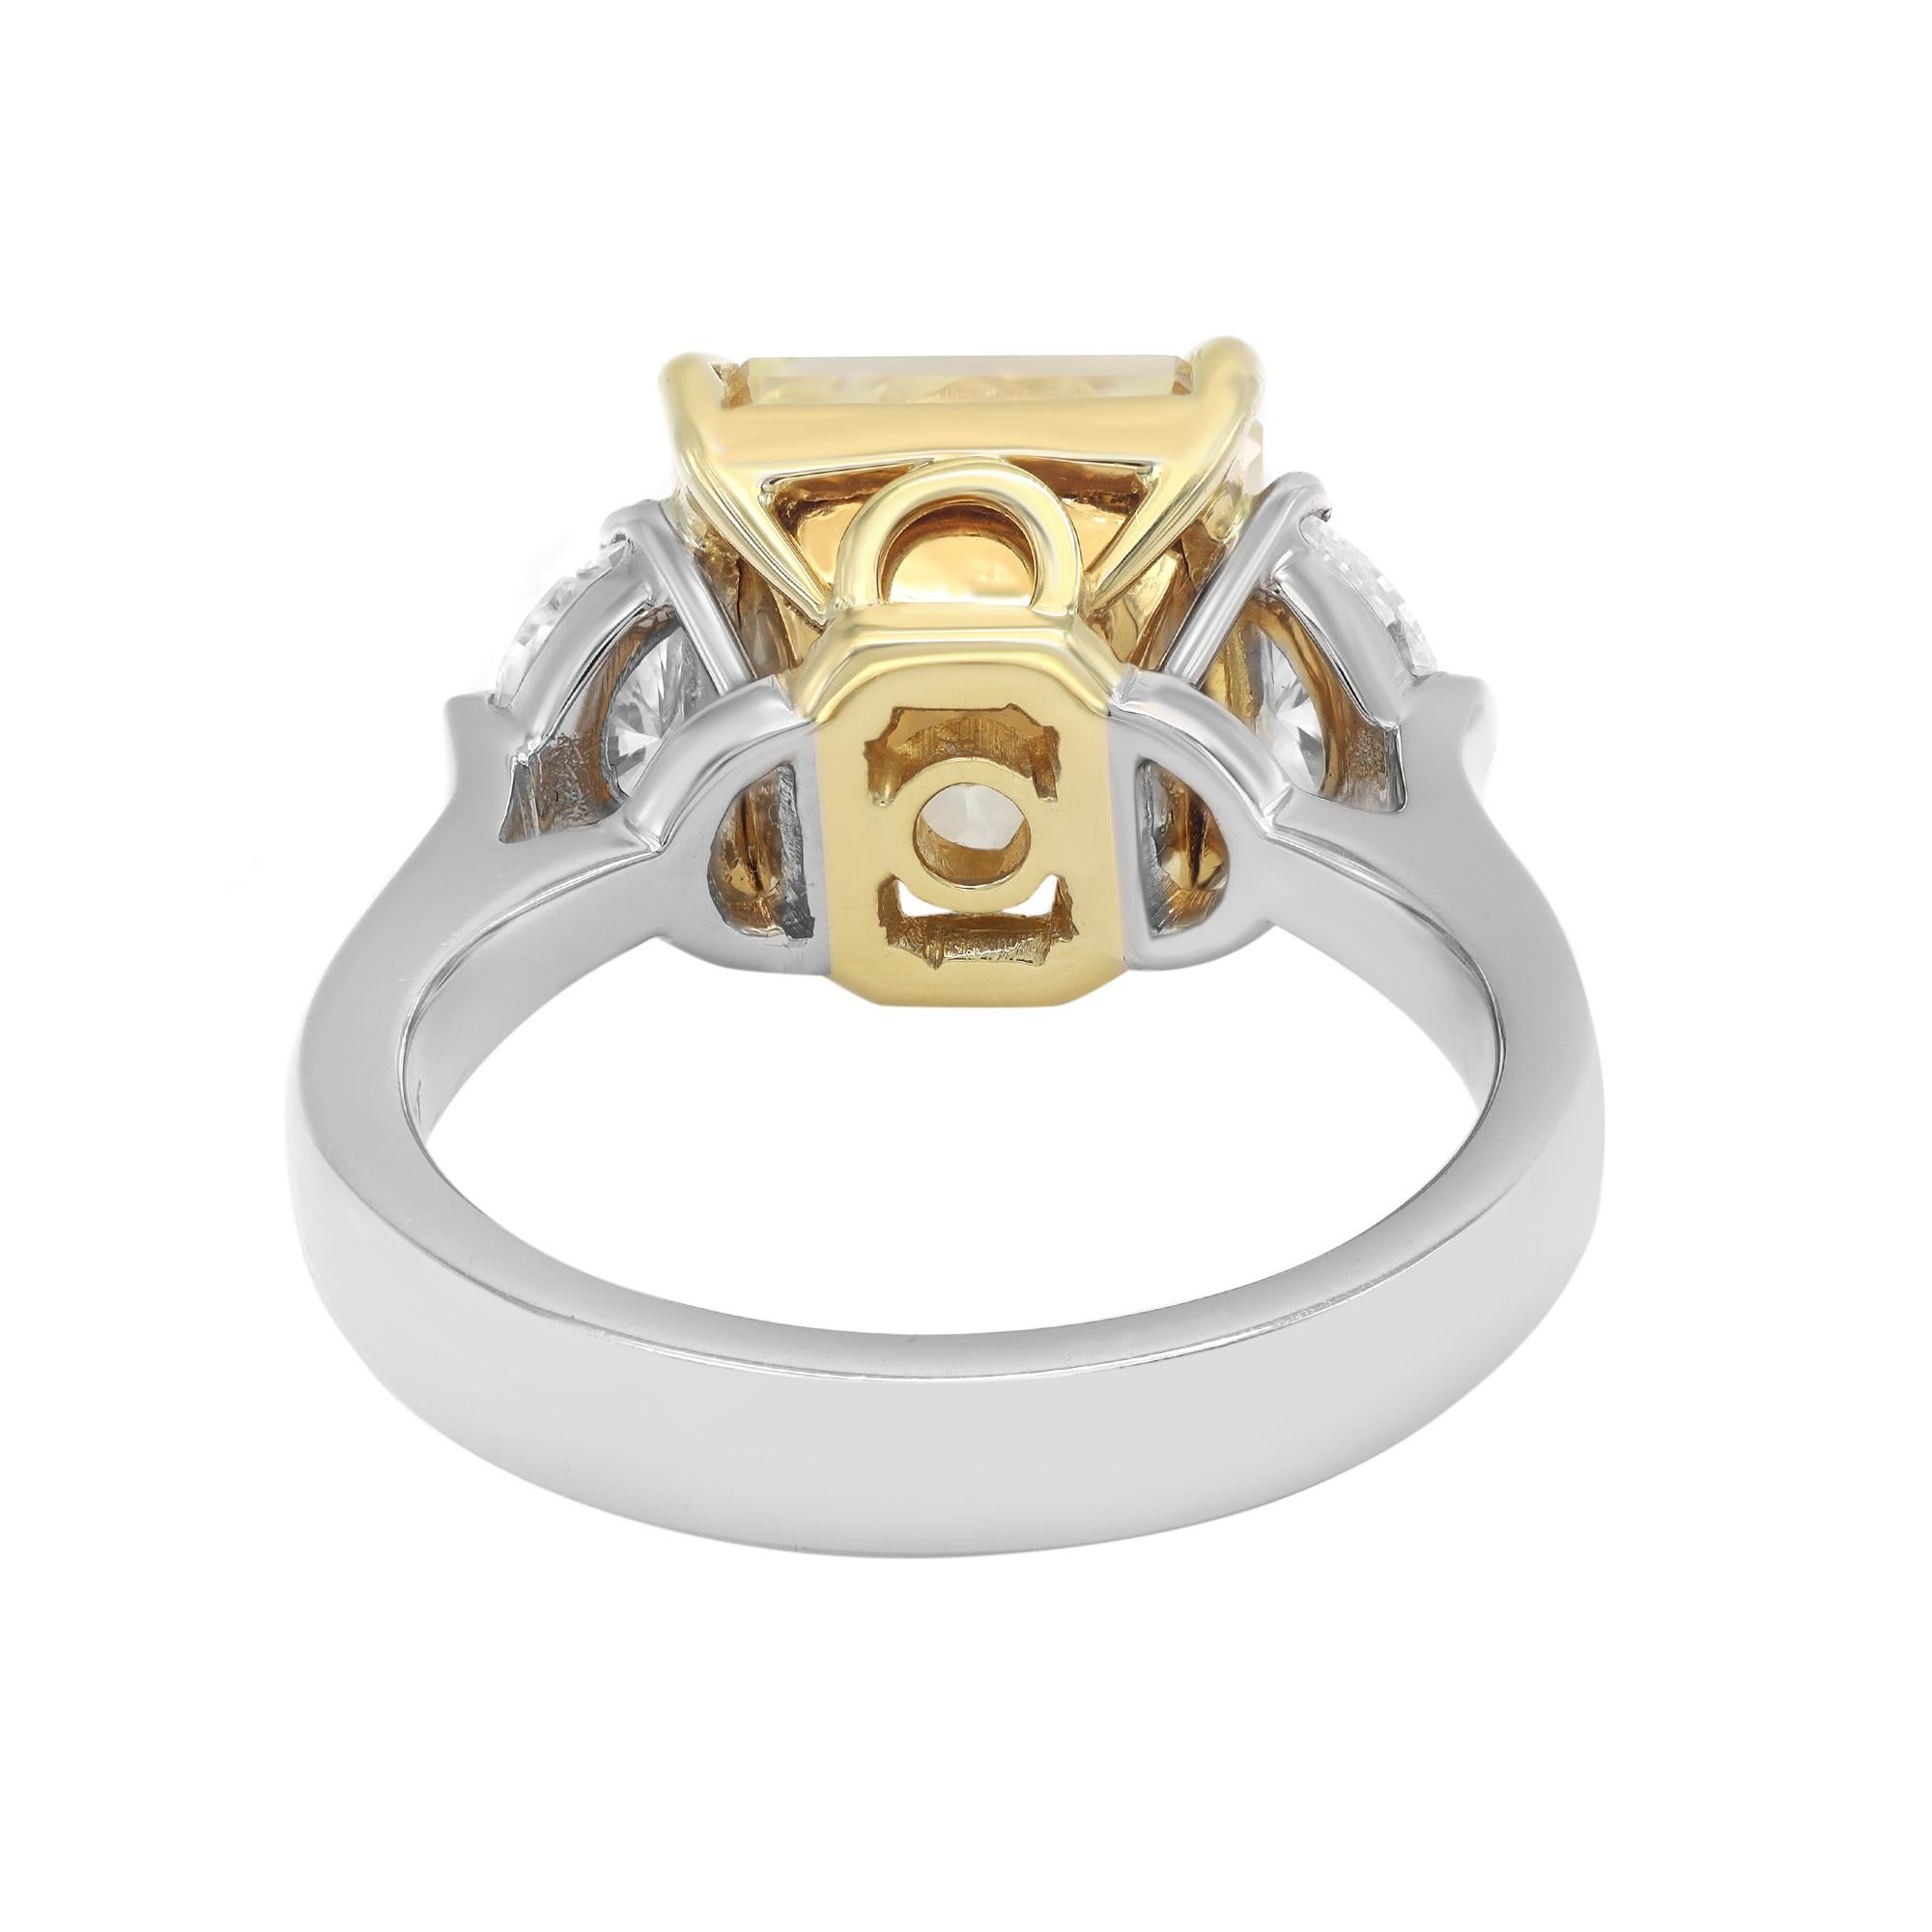 Princess Cut Light Yellow Diamond Ring Platinum 18K Yellow Gold 5.36cts In New Condition For Sale In New York, NY